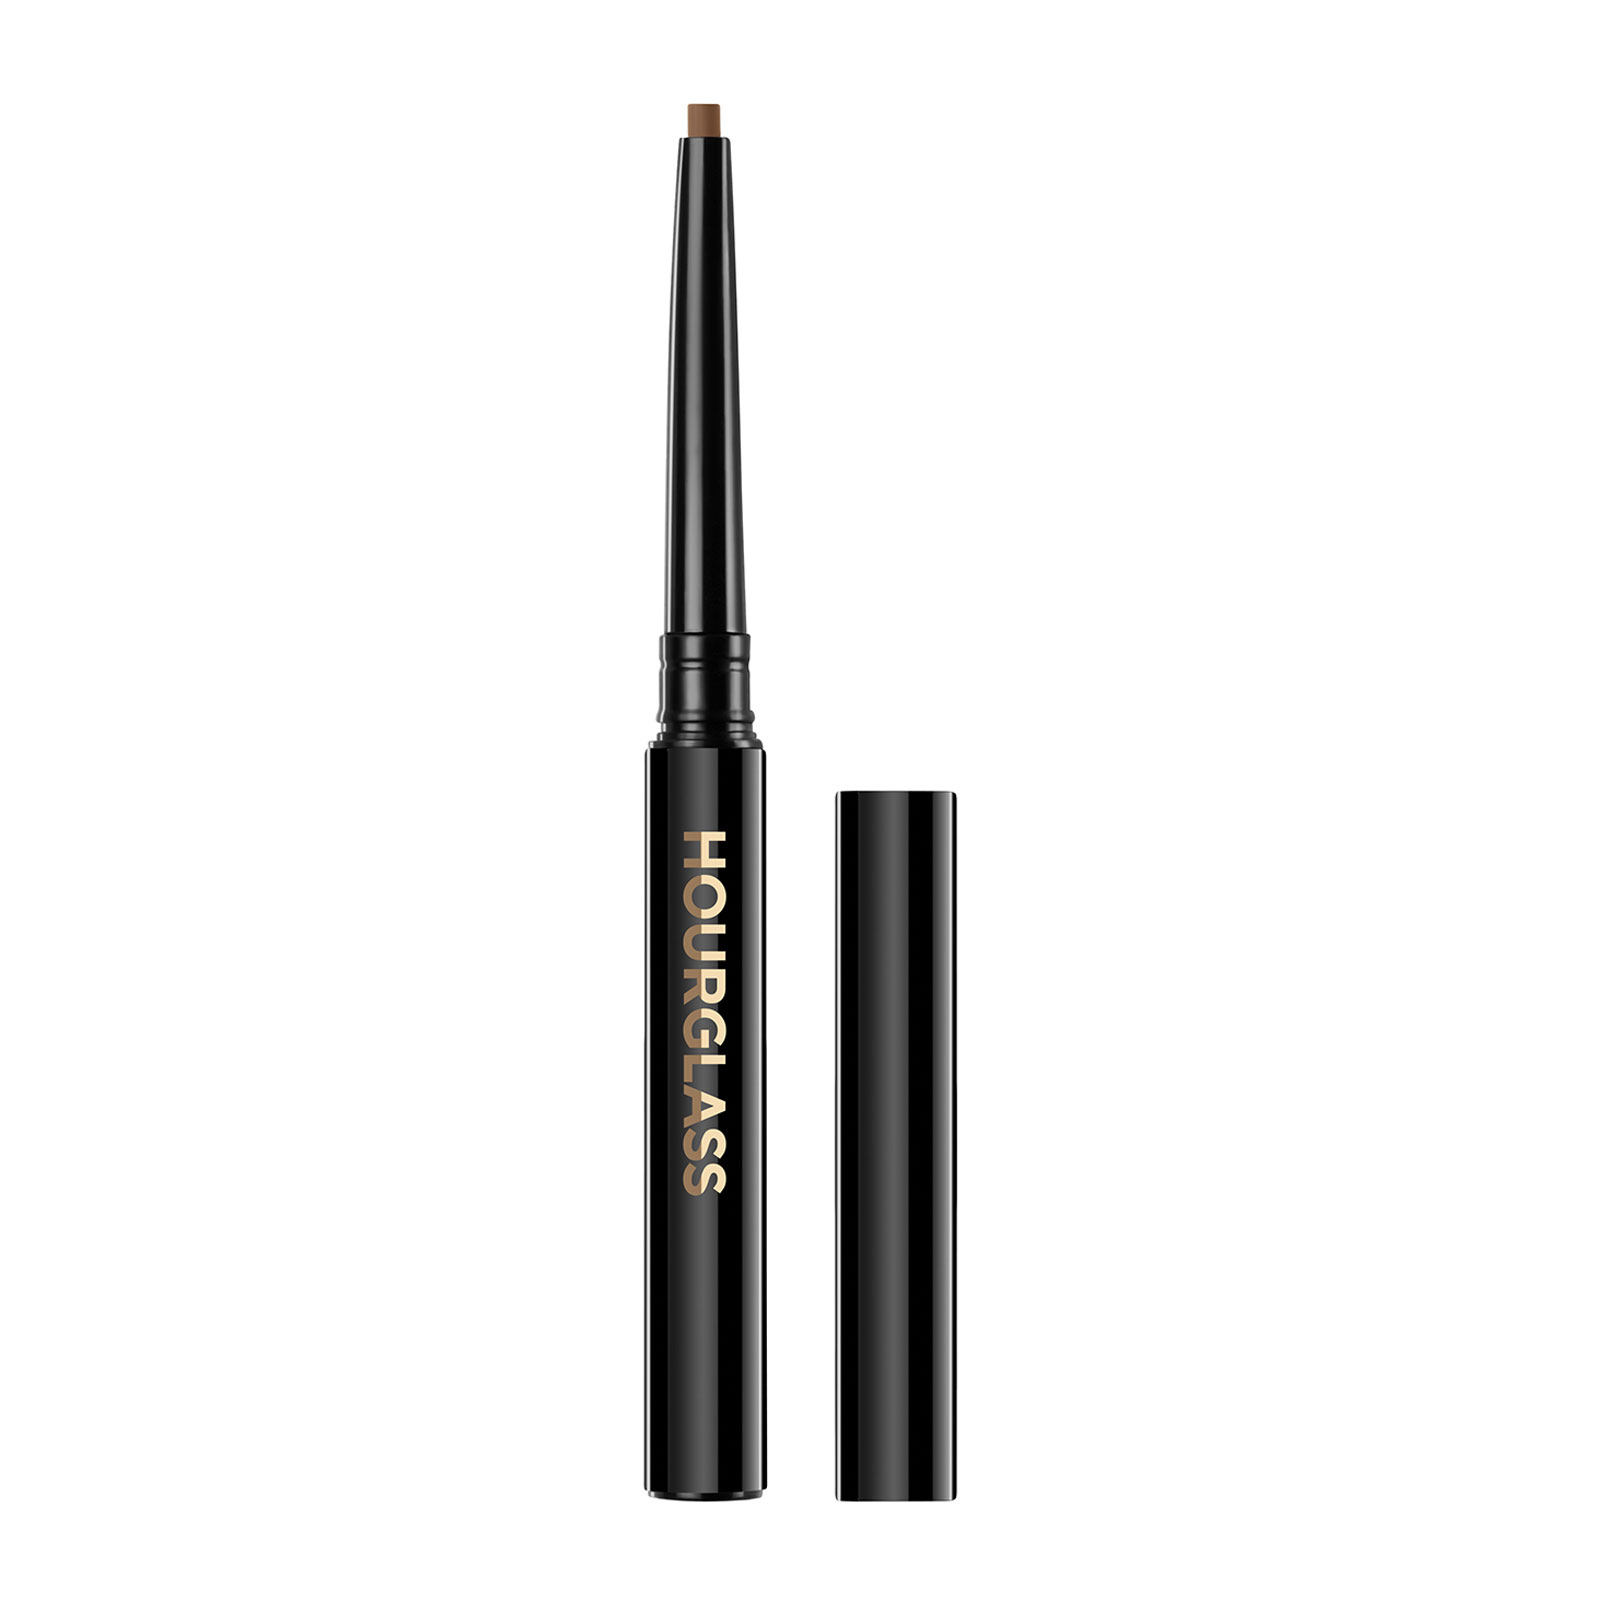 Hourglass Arch™ Brow Micro Sculpting Pencil Travel Size 0.02g Soft Brunette